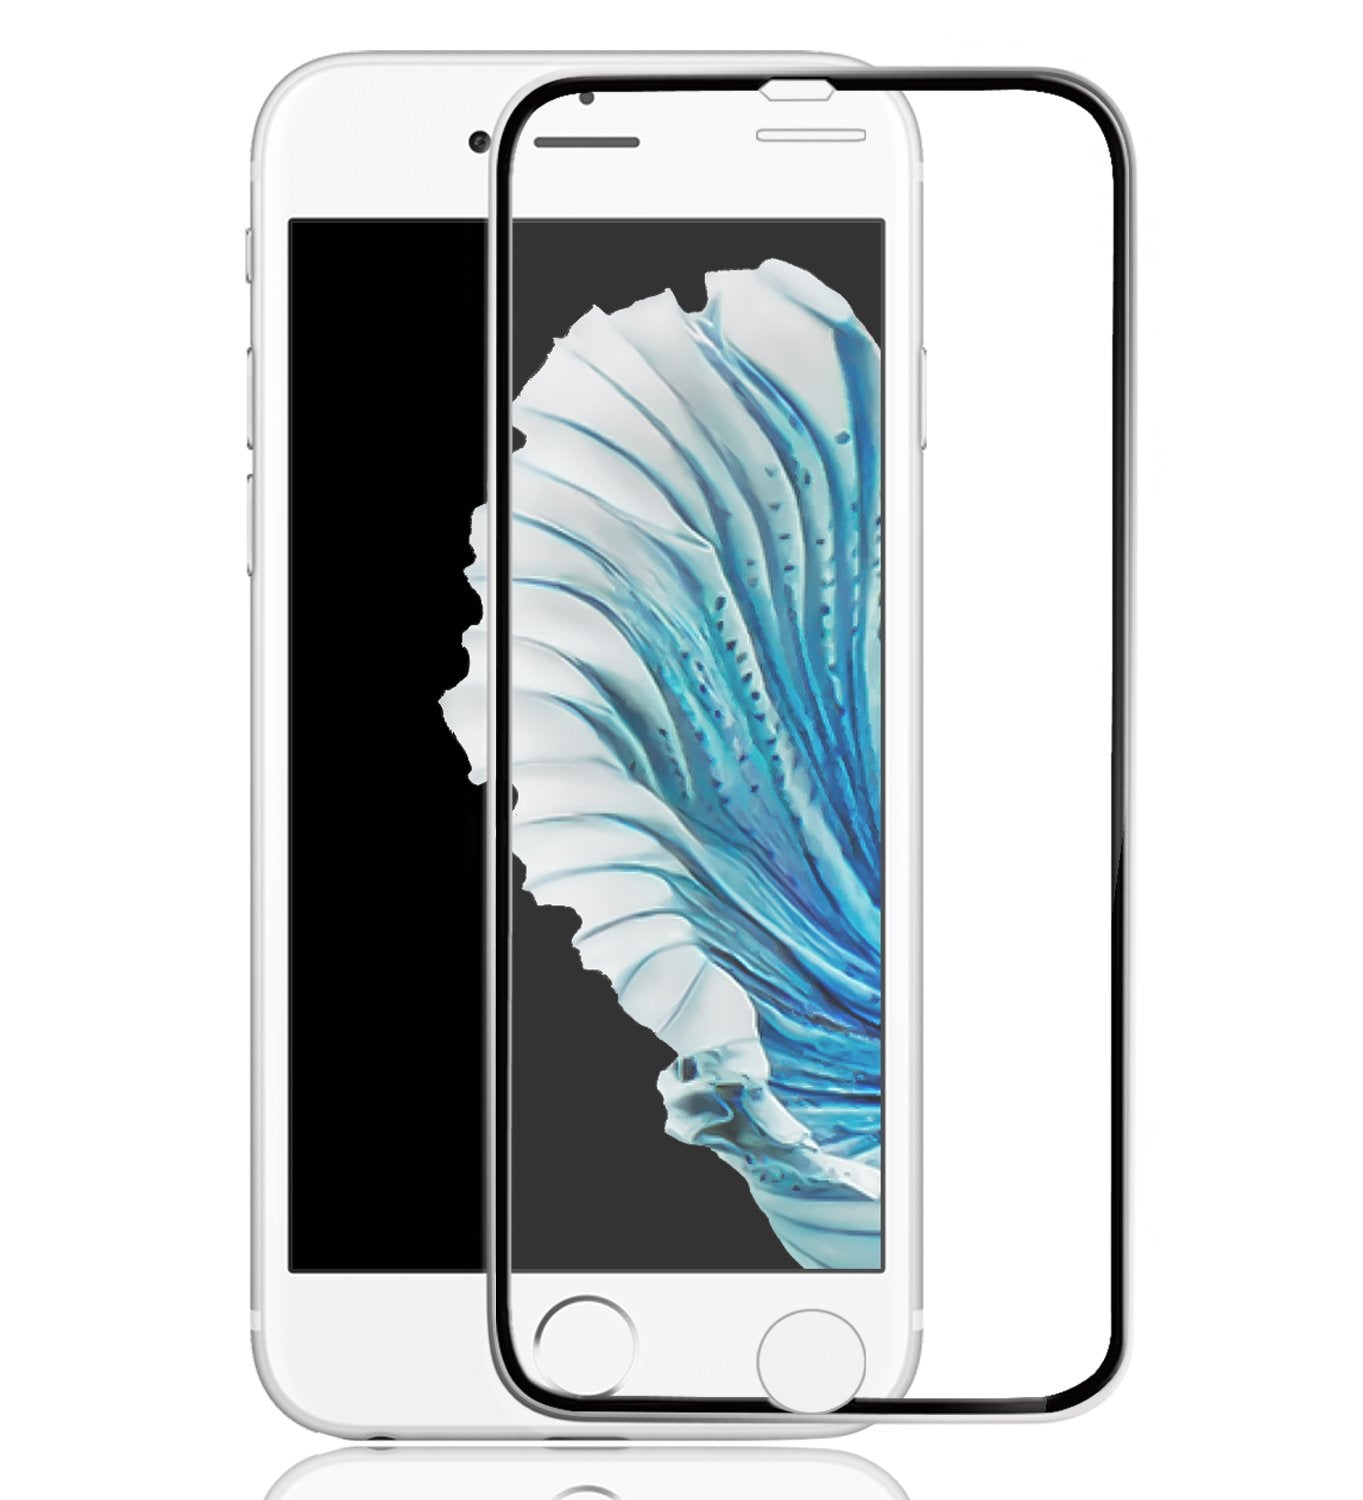 Mobile Screen Guard Sticker For I Phone 6 (4.7 in)